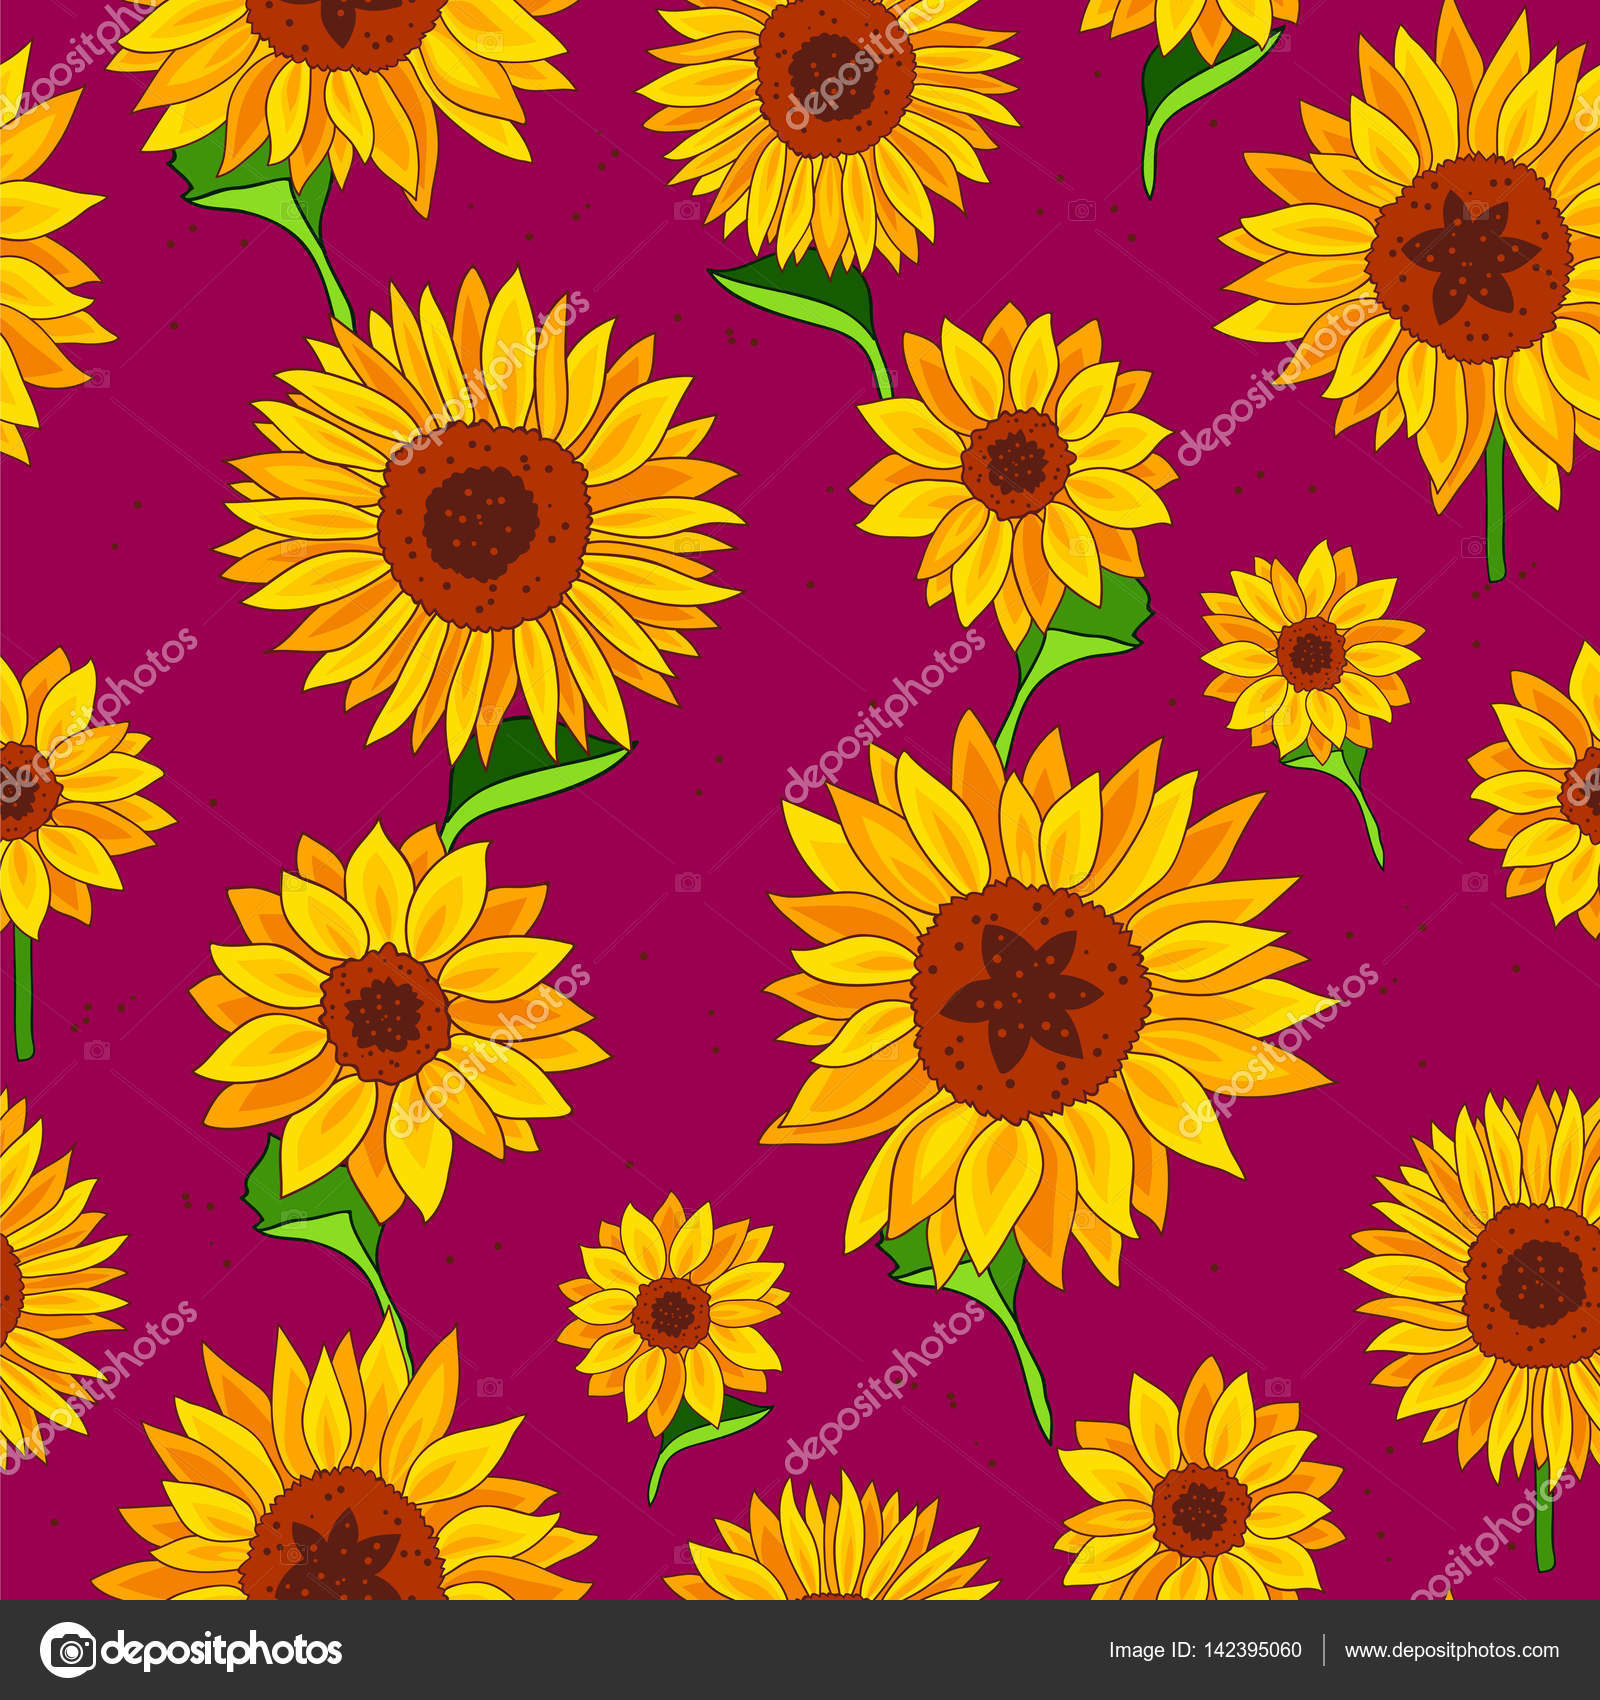 Floral Wrapping Paper - Sunflowers Gift Wrapping Paper - Blue